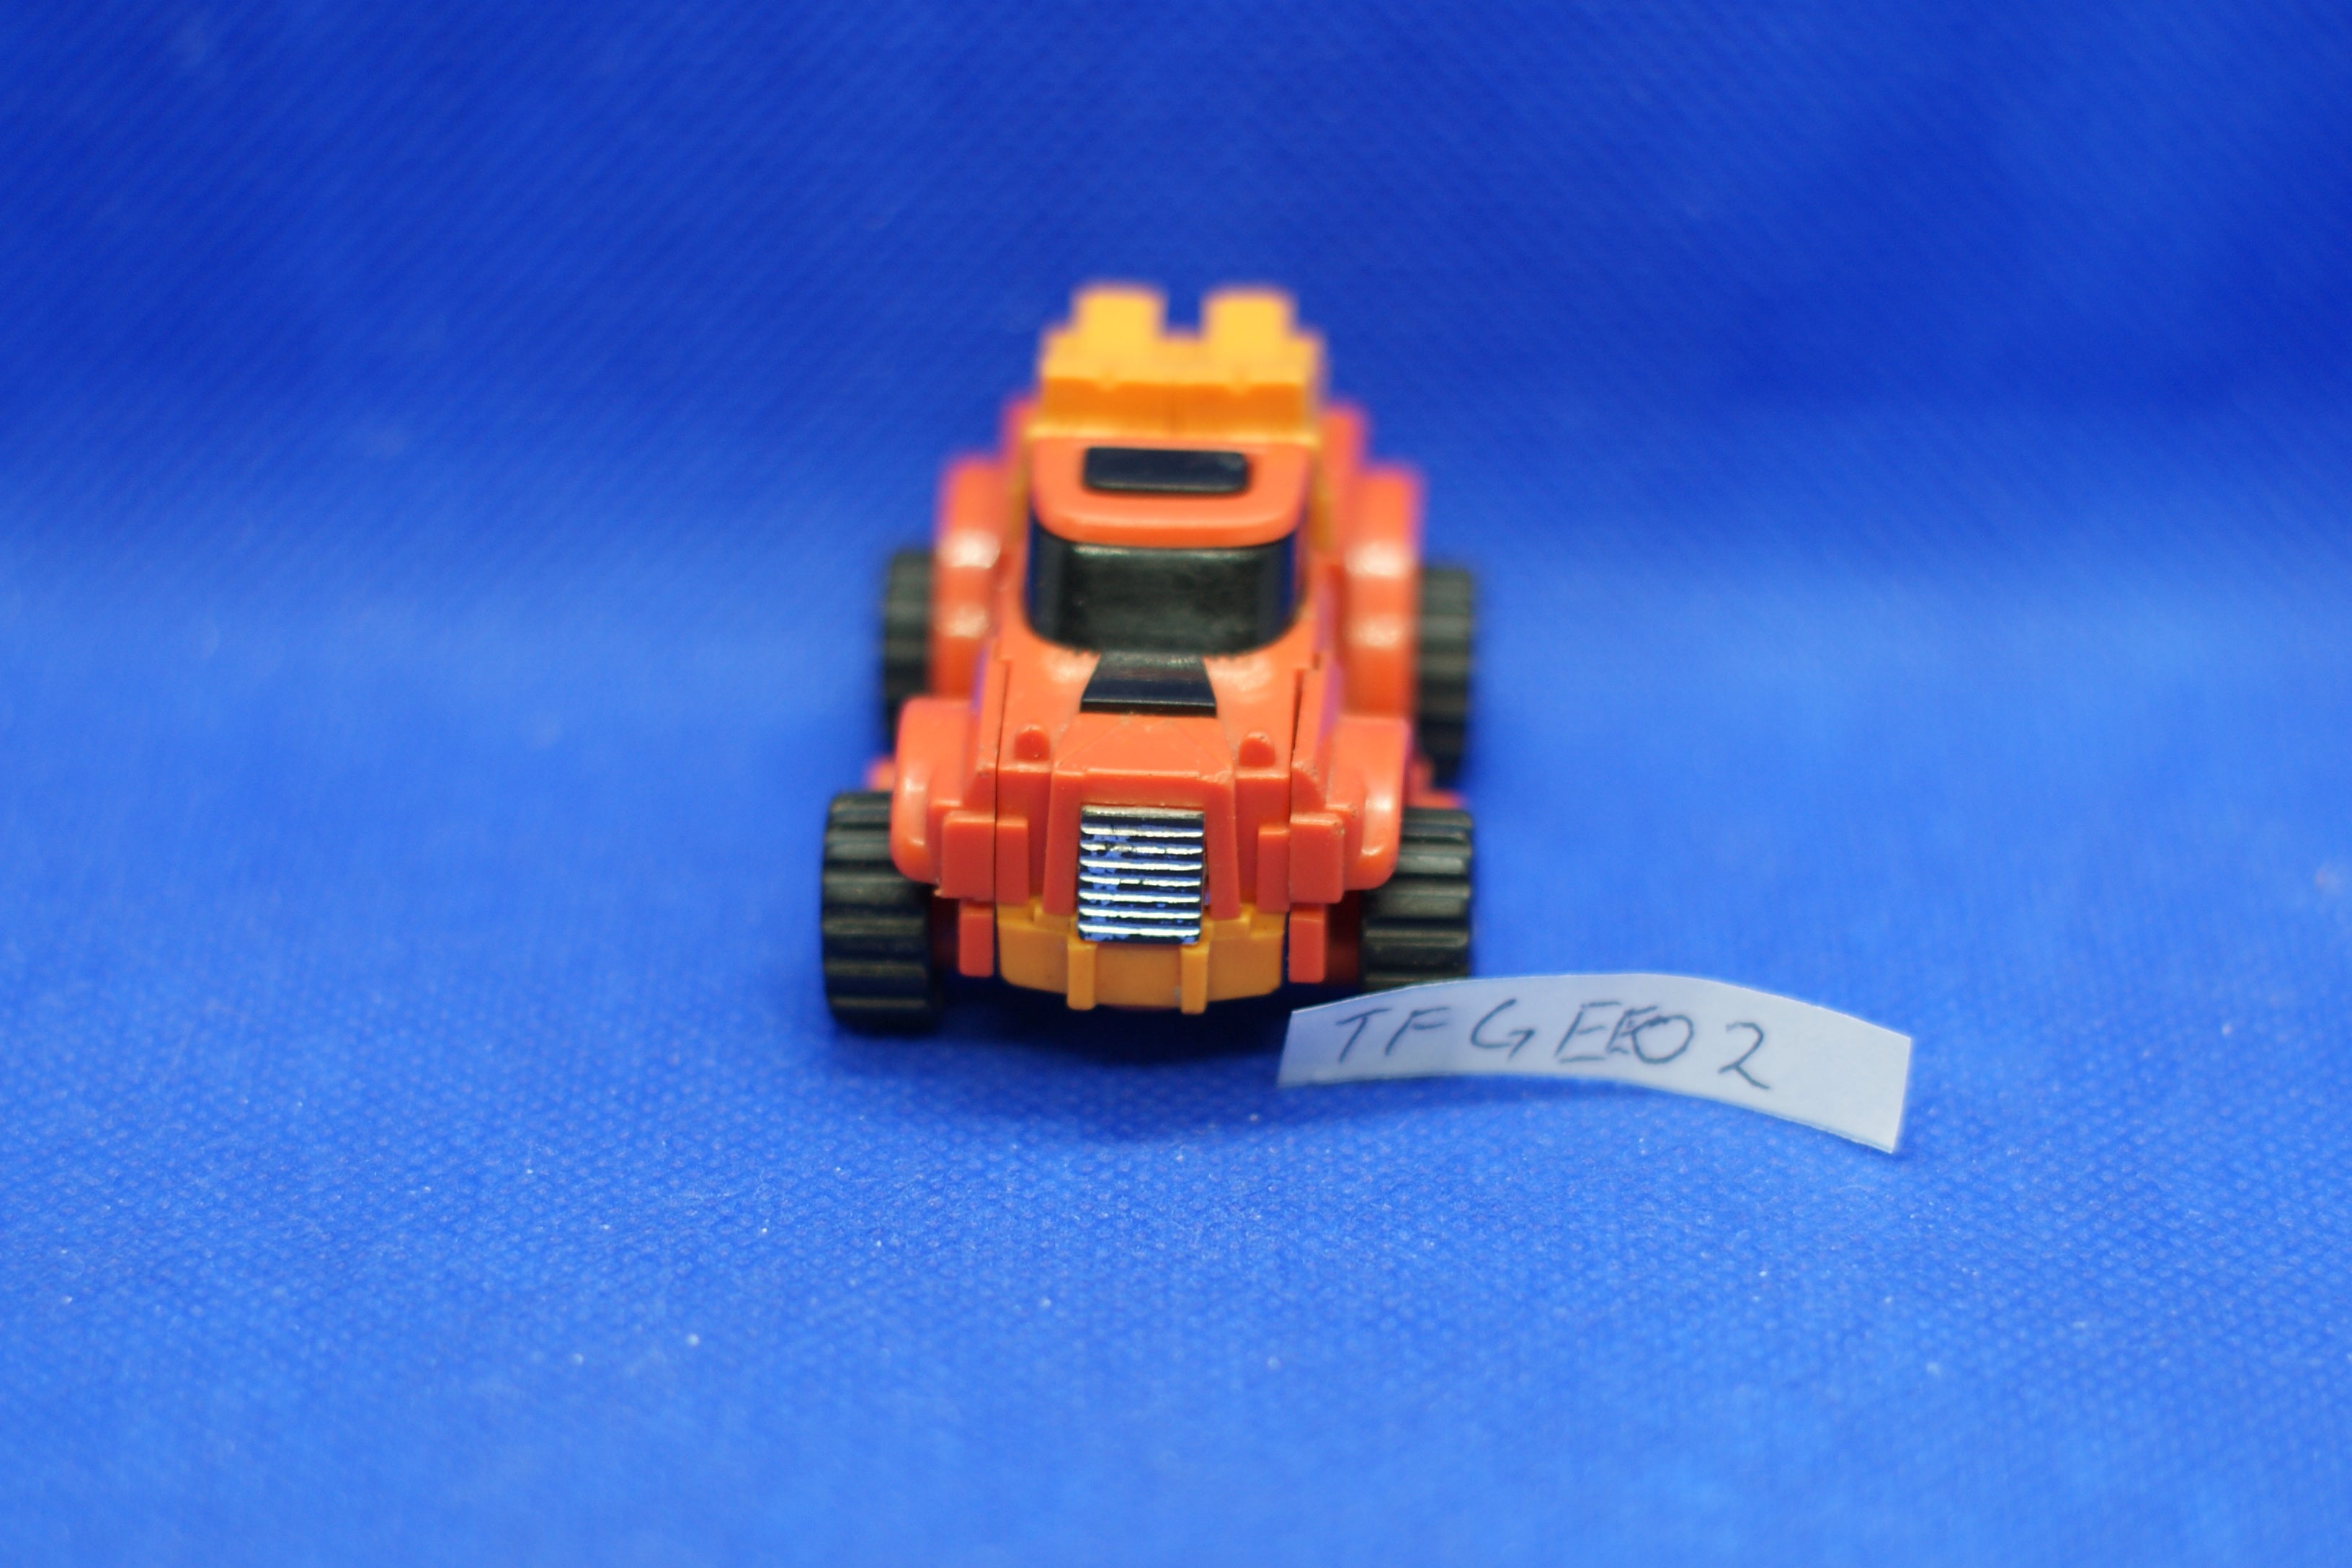 Transformers - Autobot: Gears Orange (TFGEE02) | All Aboard Games